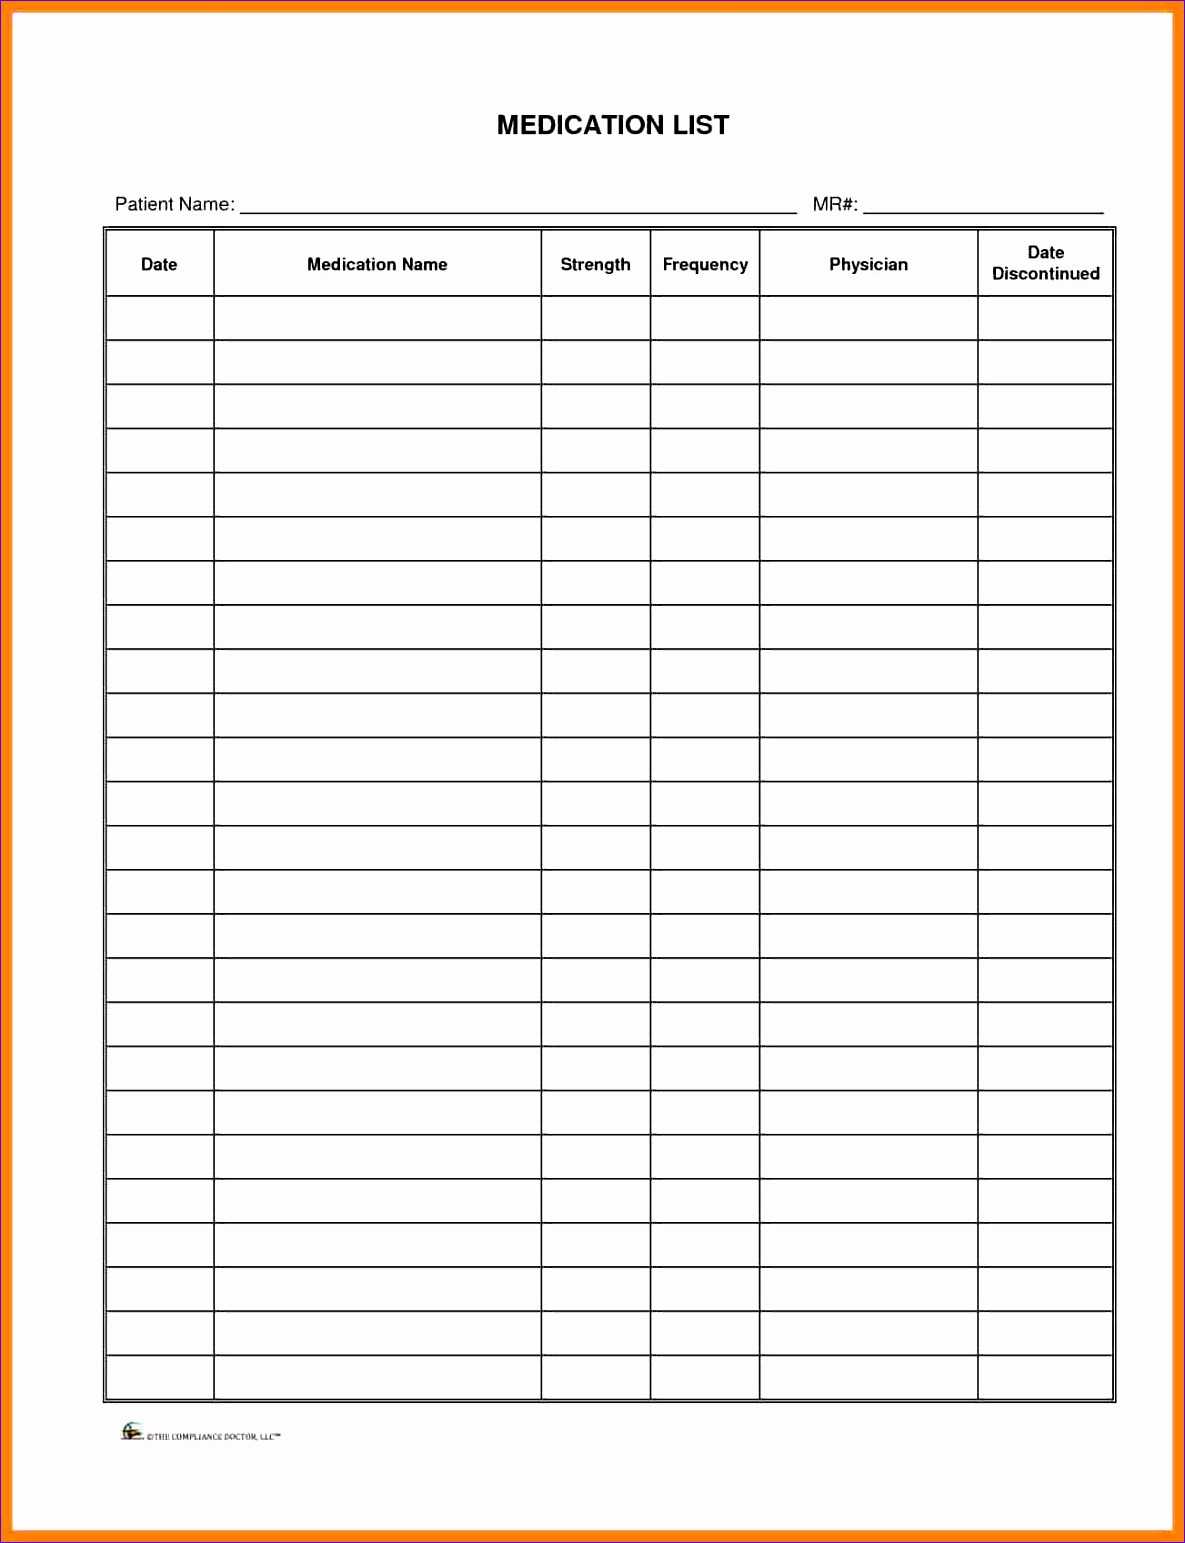 Medication List Template Excel With Regard To Blank Medication List Templates